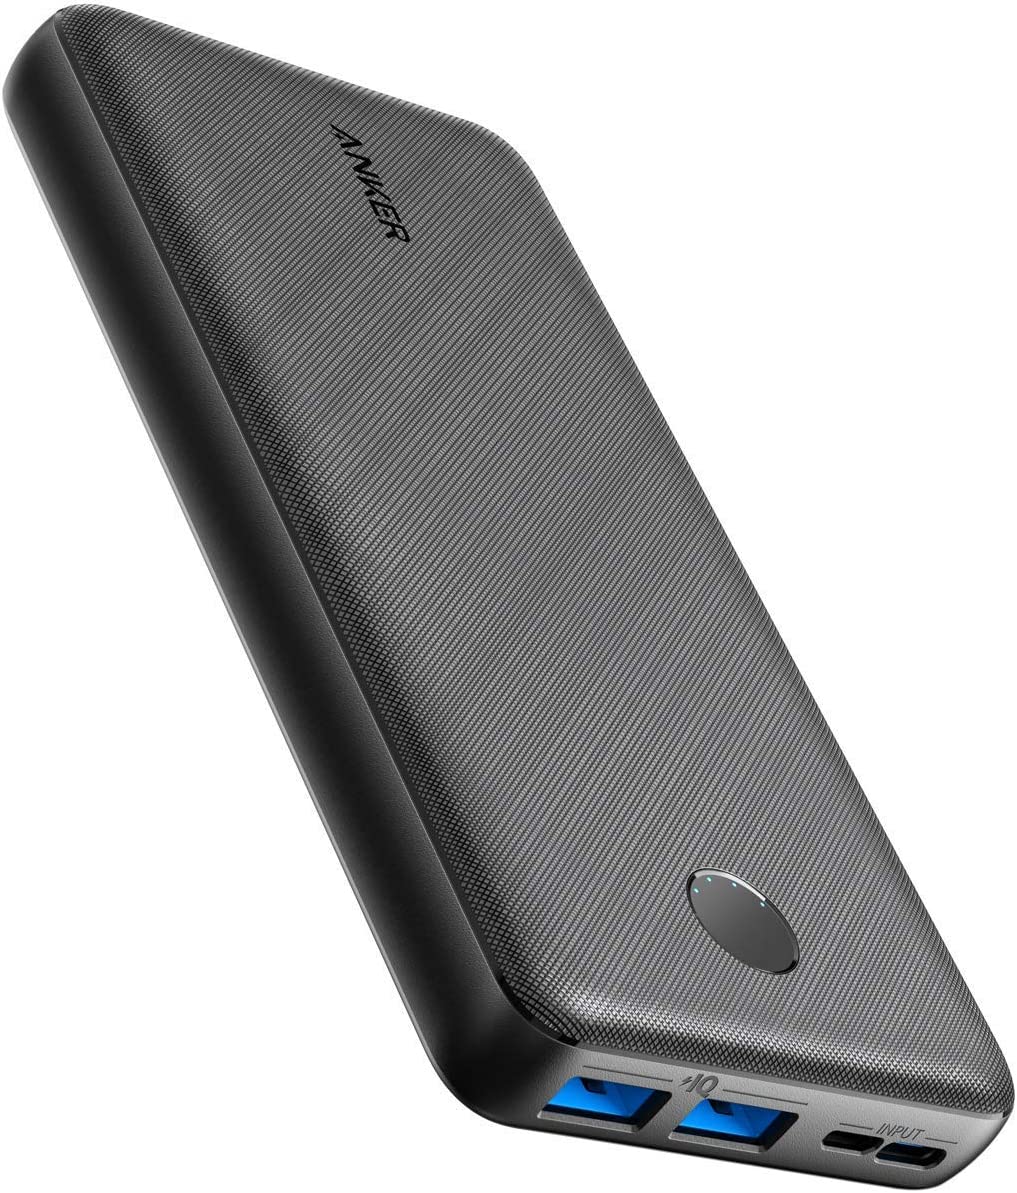 Anker PowerCore Essential 20000 Portable Charger, 20000mAh Power Bank with PowerIQ Technology and USB-C